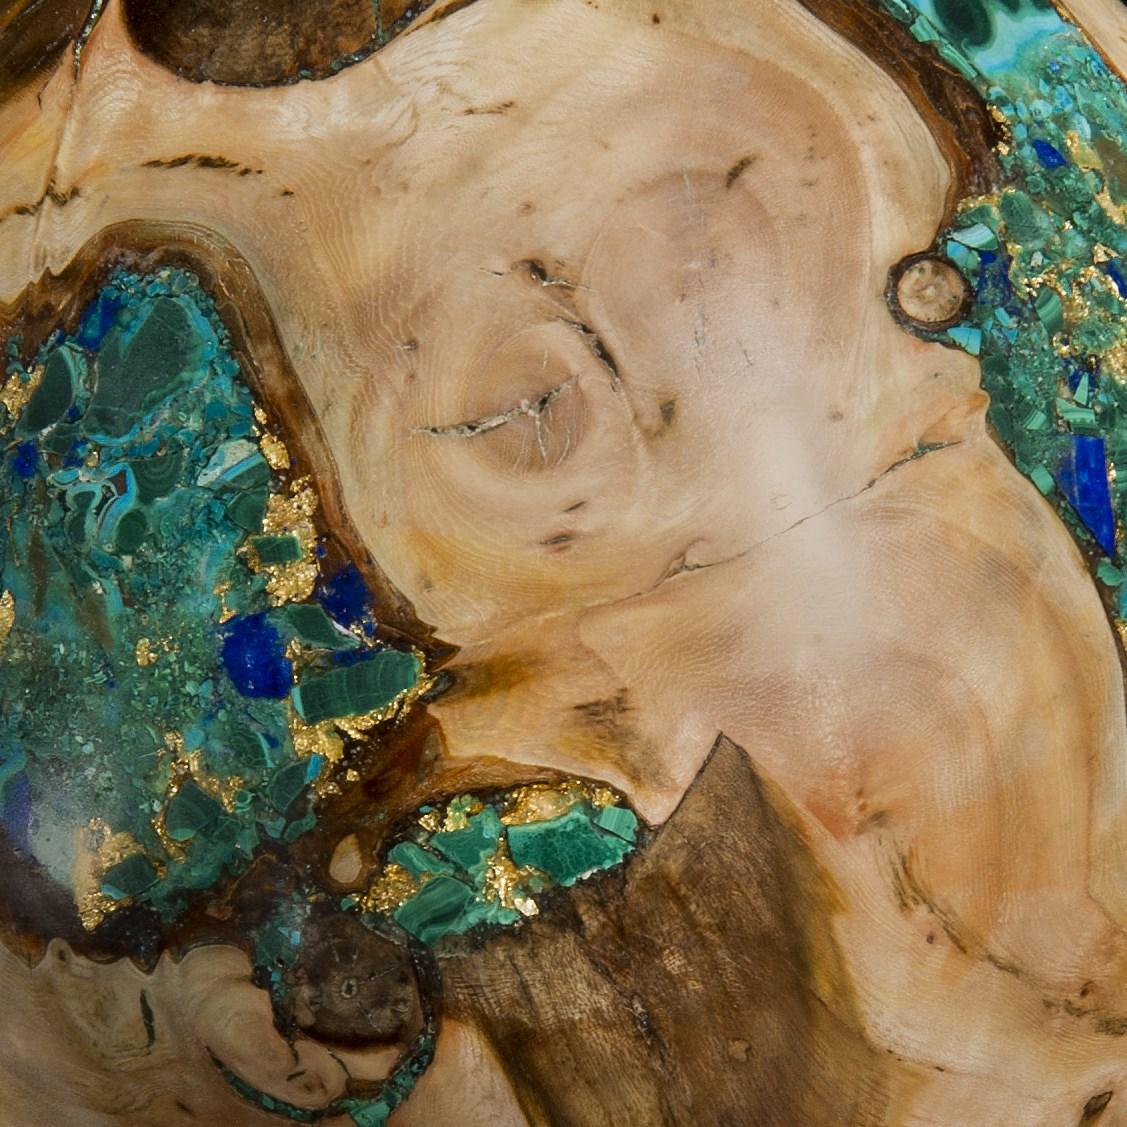 Hand-Crafted Earthly Treasures No 31, an Elm & Mixed Mineral Sculpture by Morrison Thomas